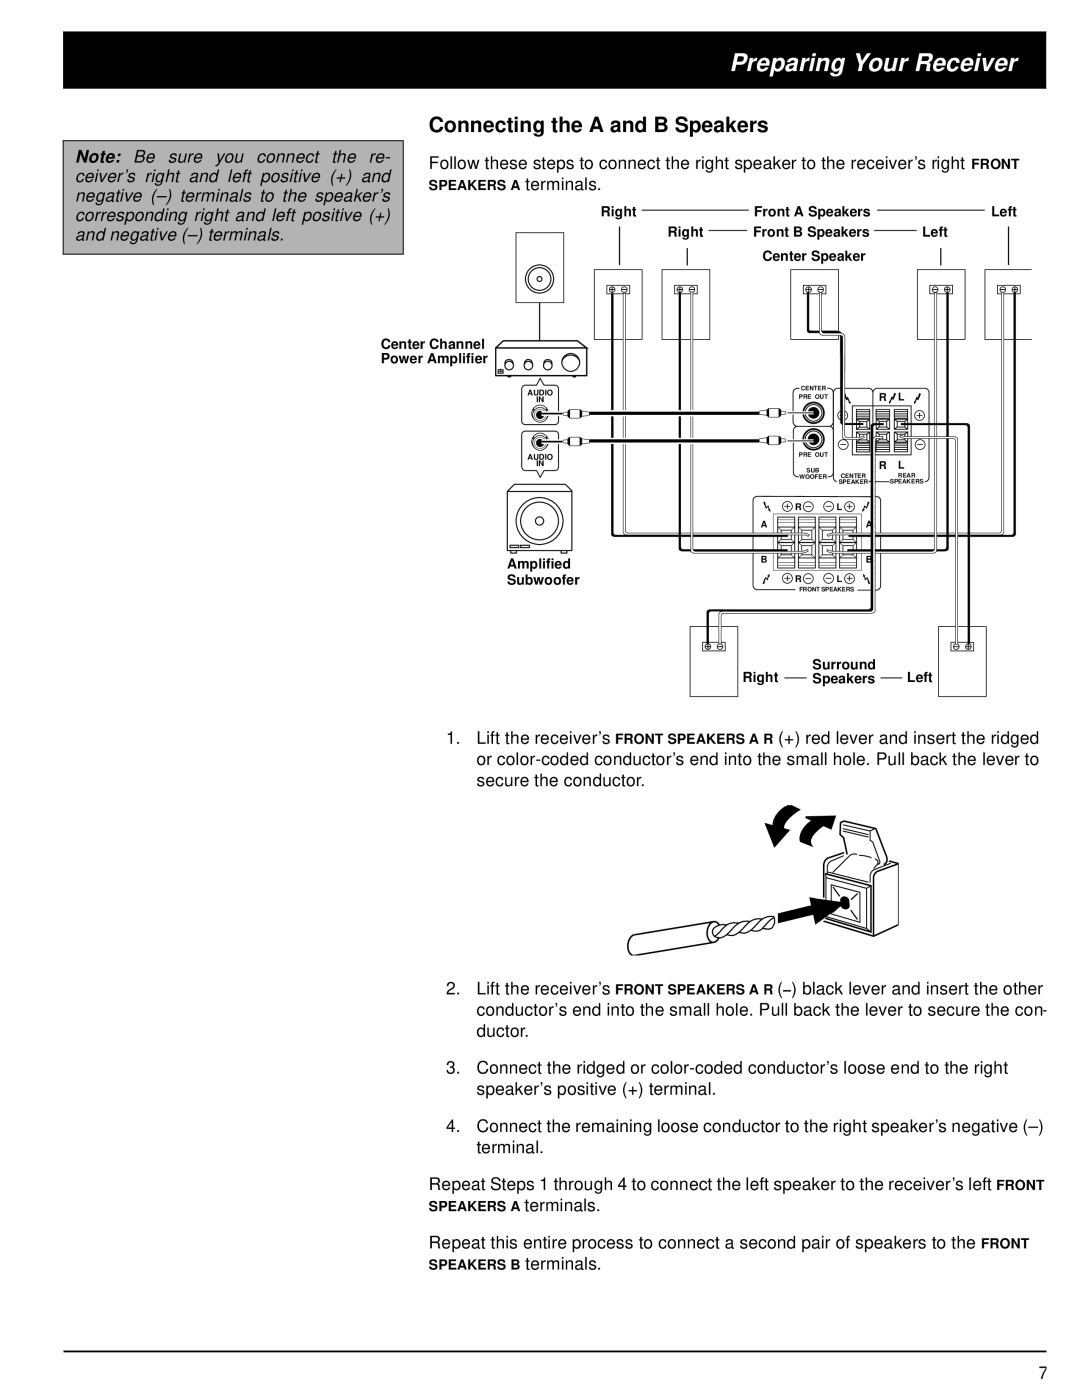 Optimus STAV-3680 owner manual Connecting the A and B Speakers, Preparing Your Receiver 